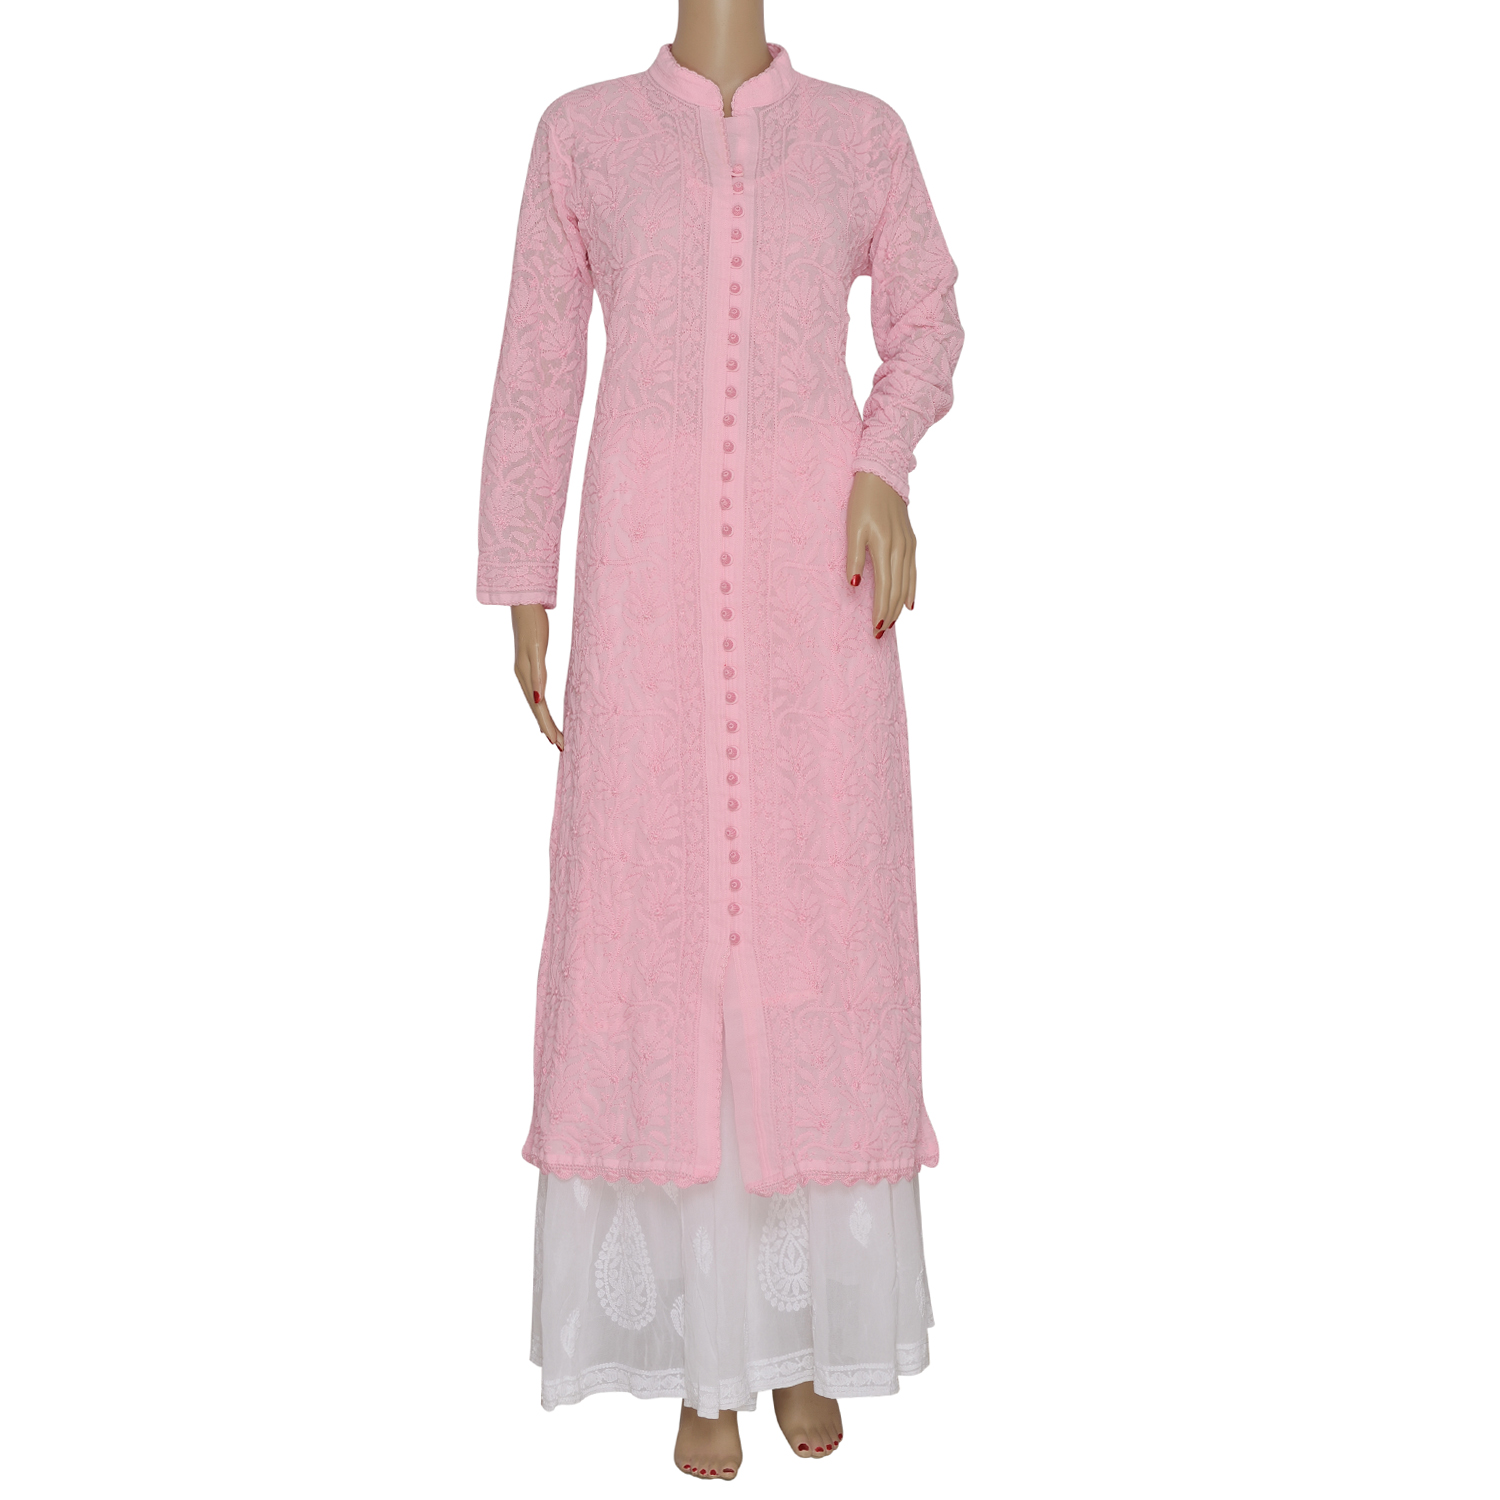 New Pink Lucknowi Chikankari Kurti For Women at Rs650Piece in ratlam  offer by Shree Jee Girls Collection And Boutique